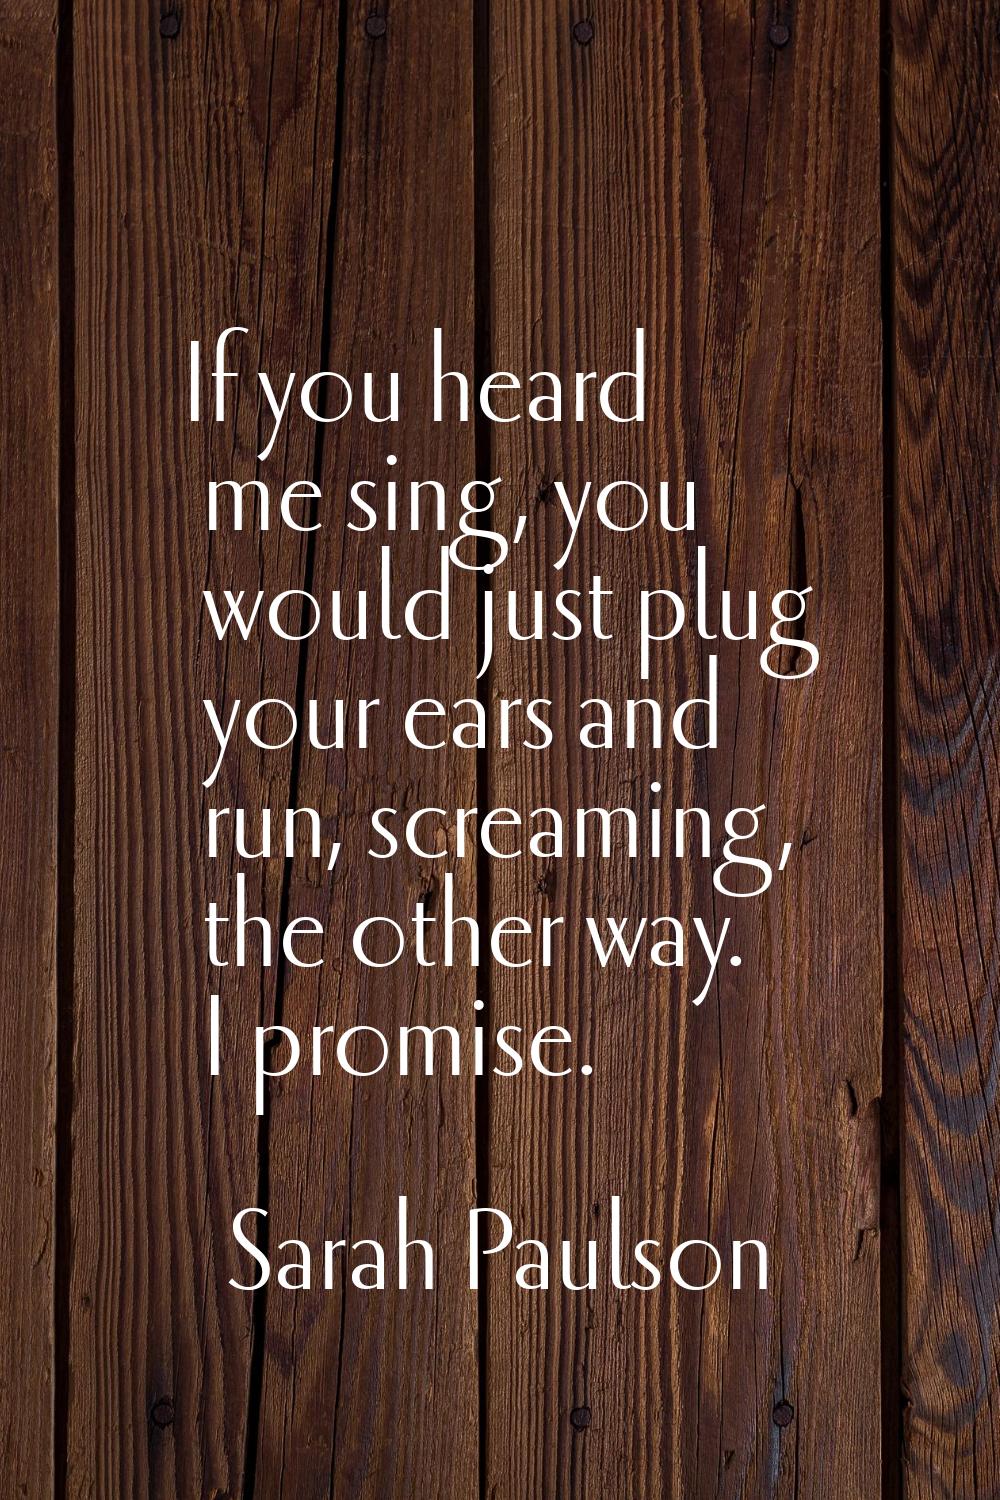 If you heard me sing, you would just plug your ears and run, screaming, the other way. I promise.